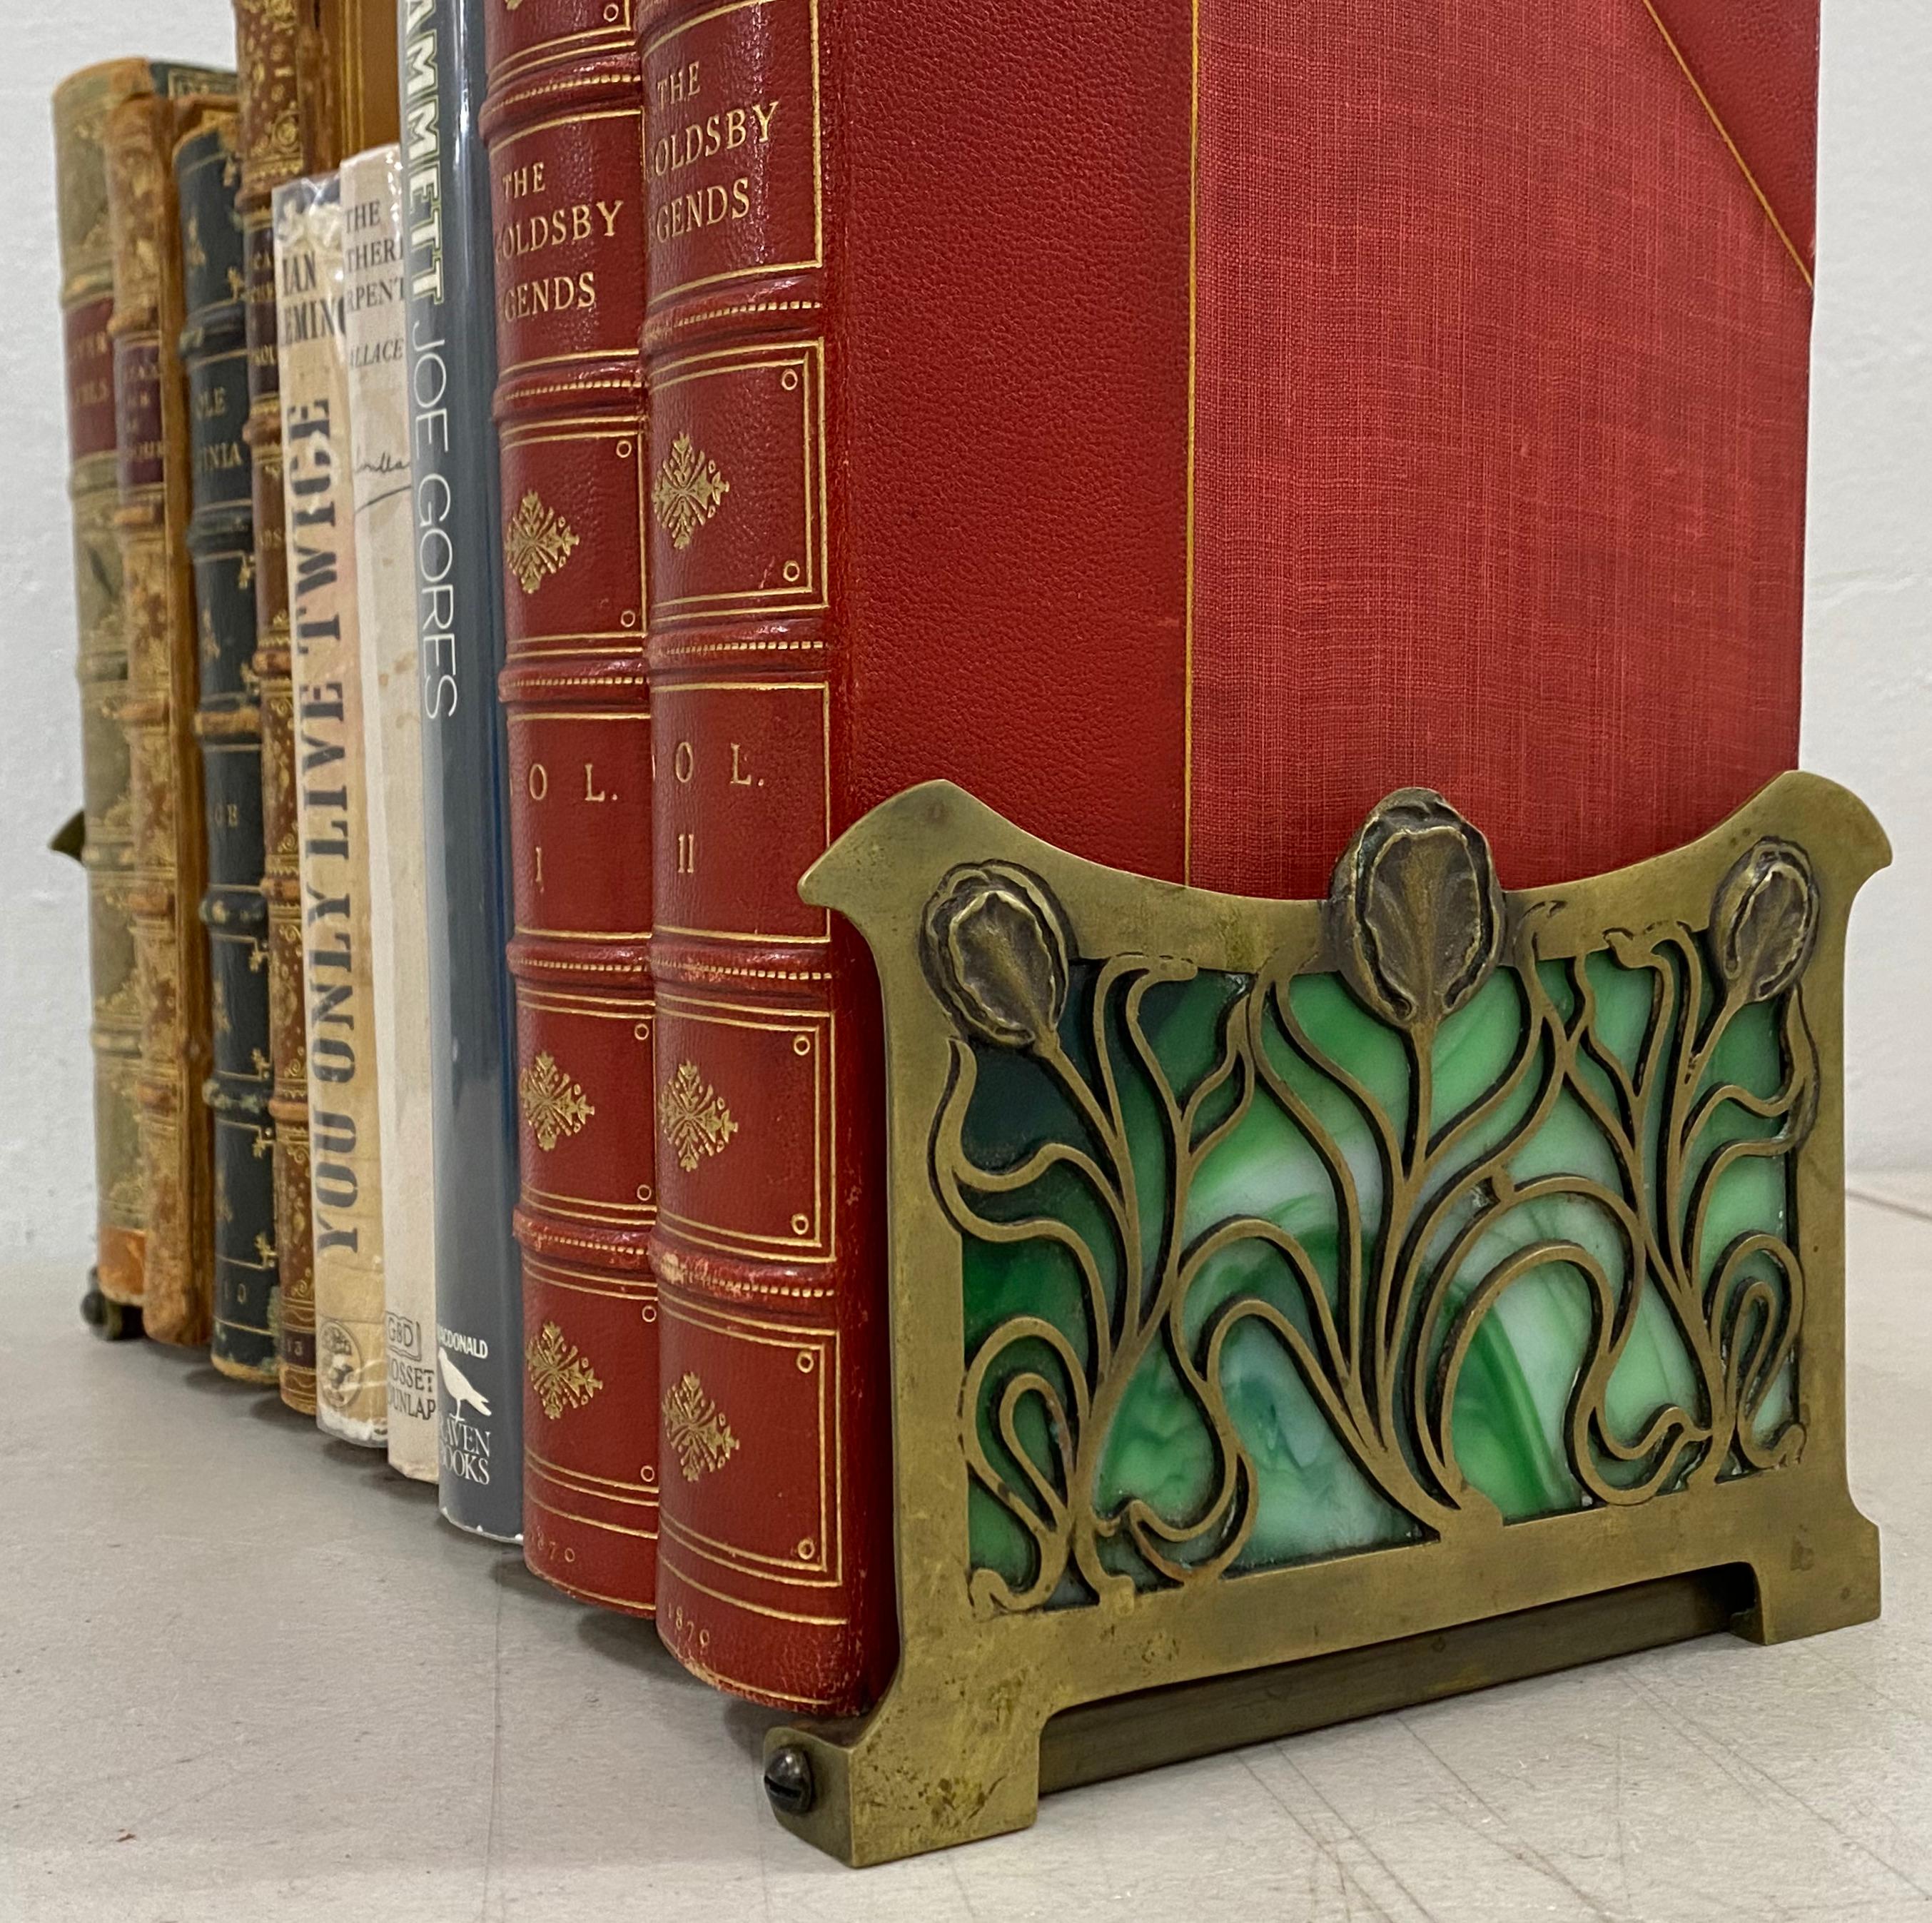 Cast Early 20th Century Brass & Stained Glass Folding / Expanding Book Holder C.1910